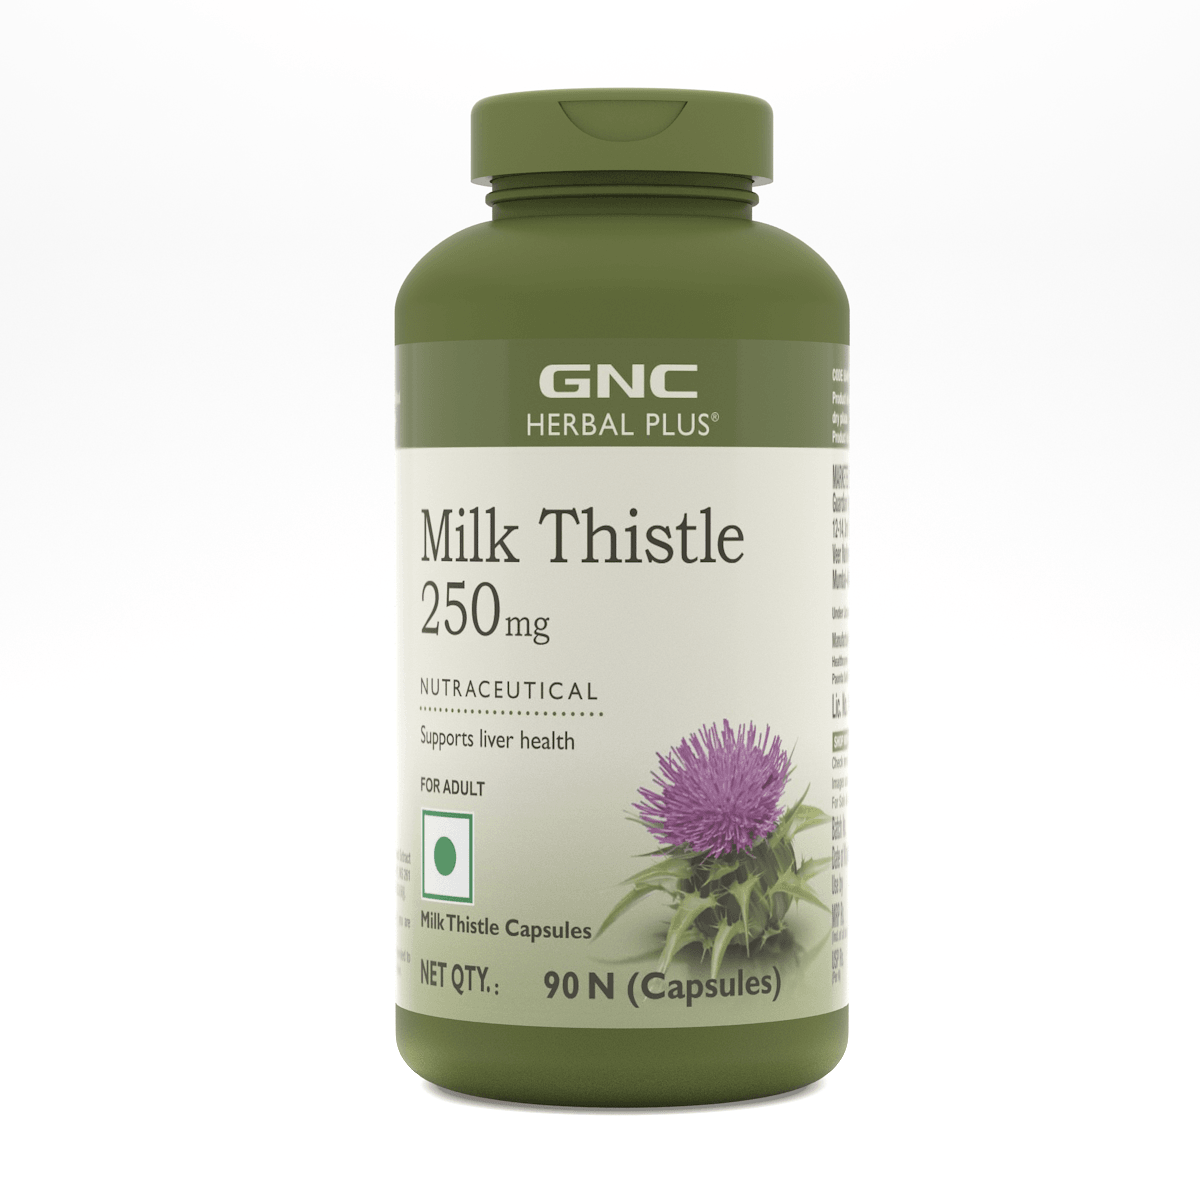 GNC Herbal Plus Milk Thistle - 250mg Detoxifies Liver Toxins & Supports Liver Health